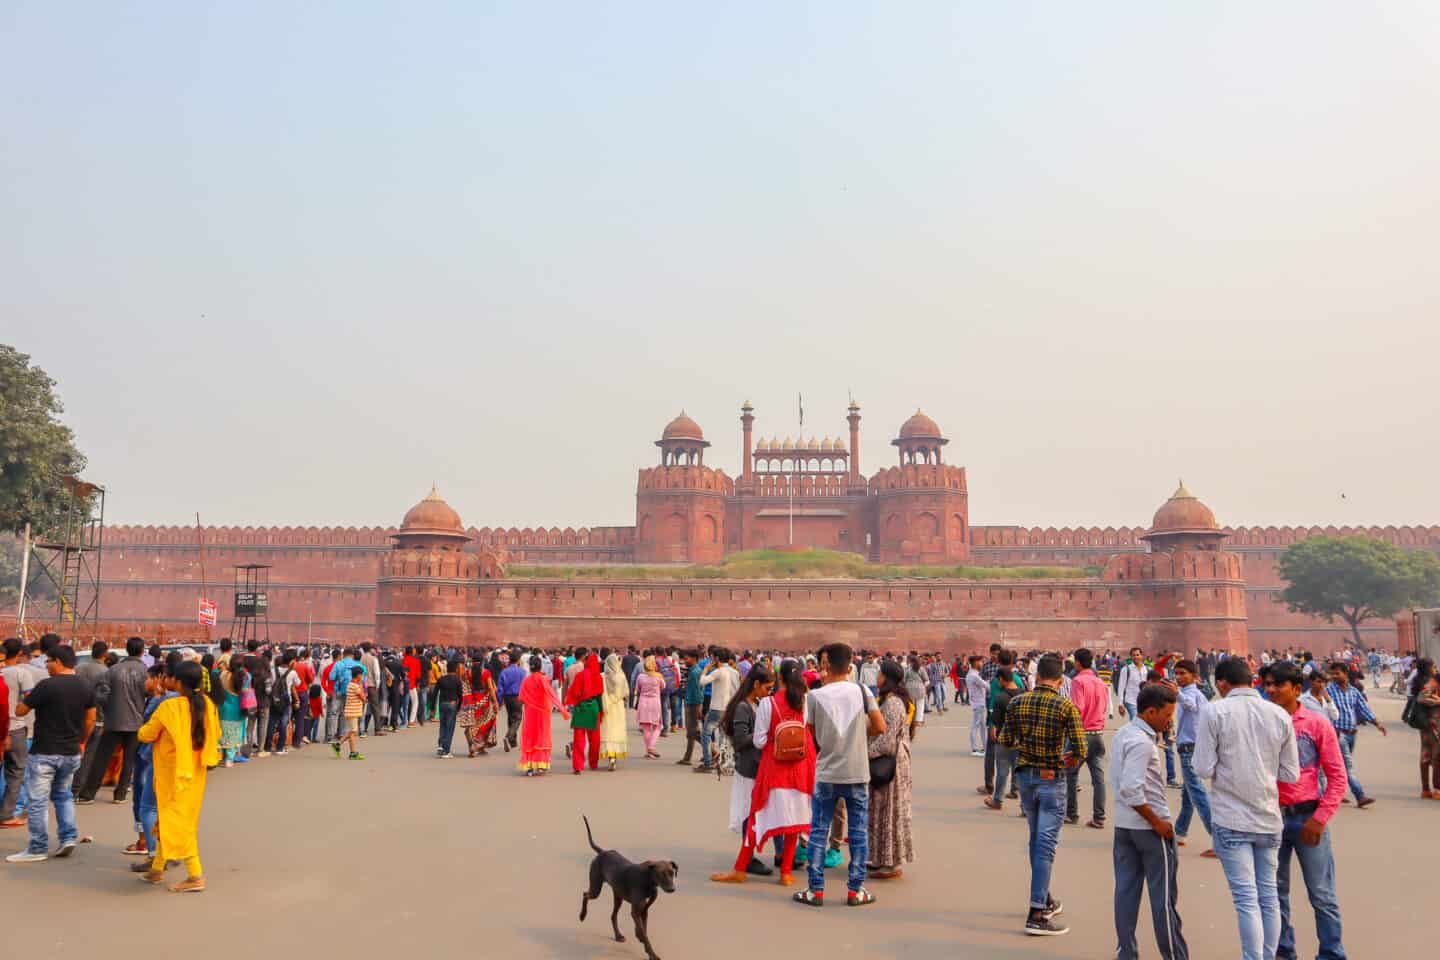 Red Fort in Old Delhi with crowds